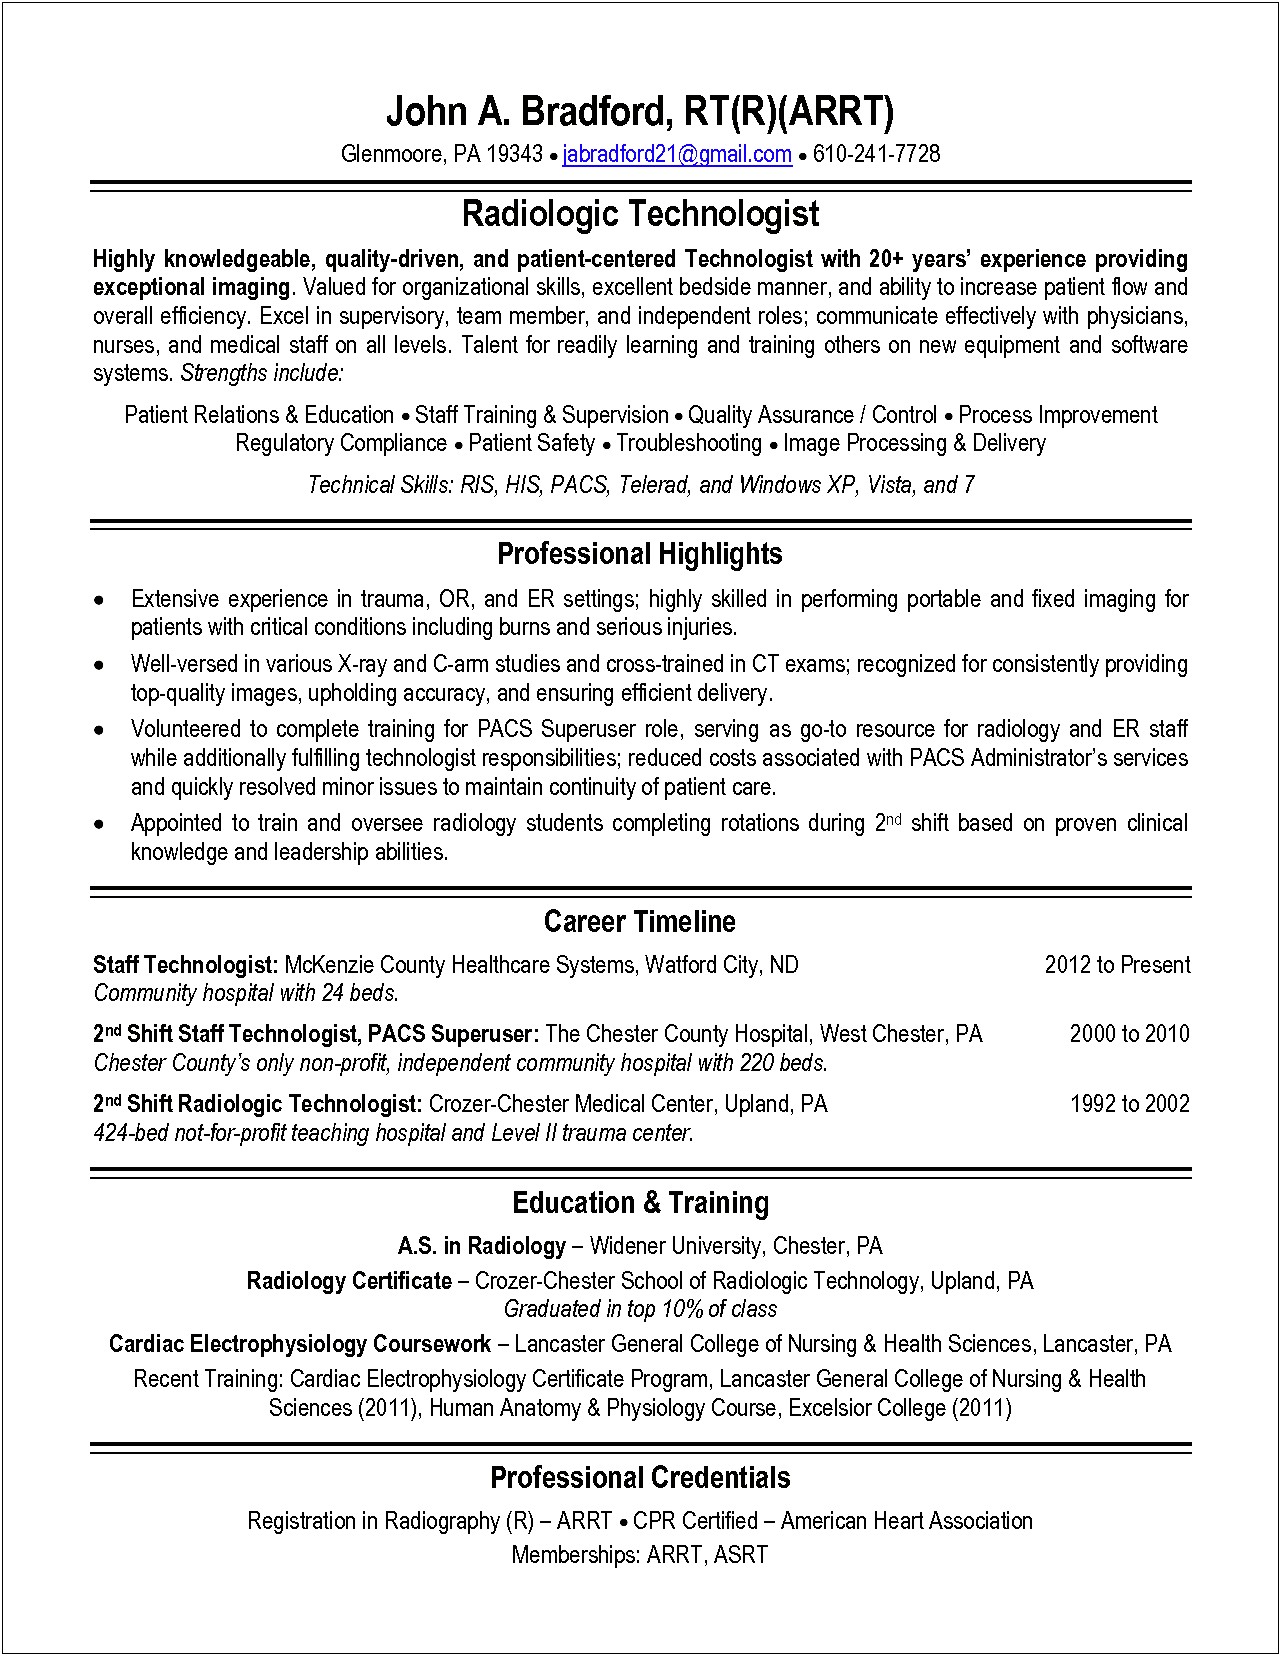 Resume Objective Examples For Radiologic Technologist